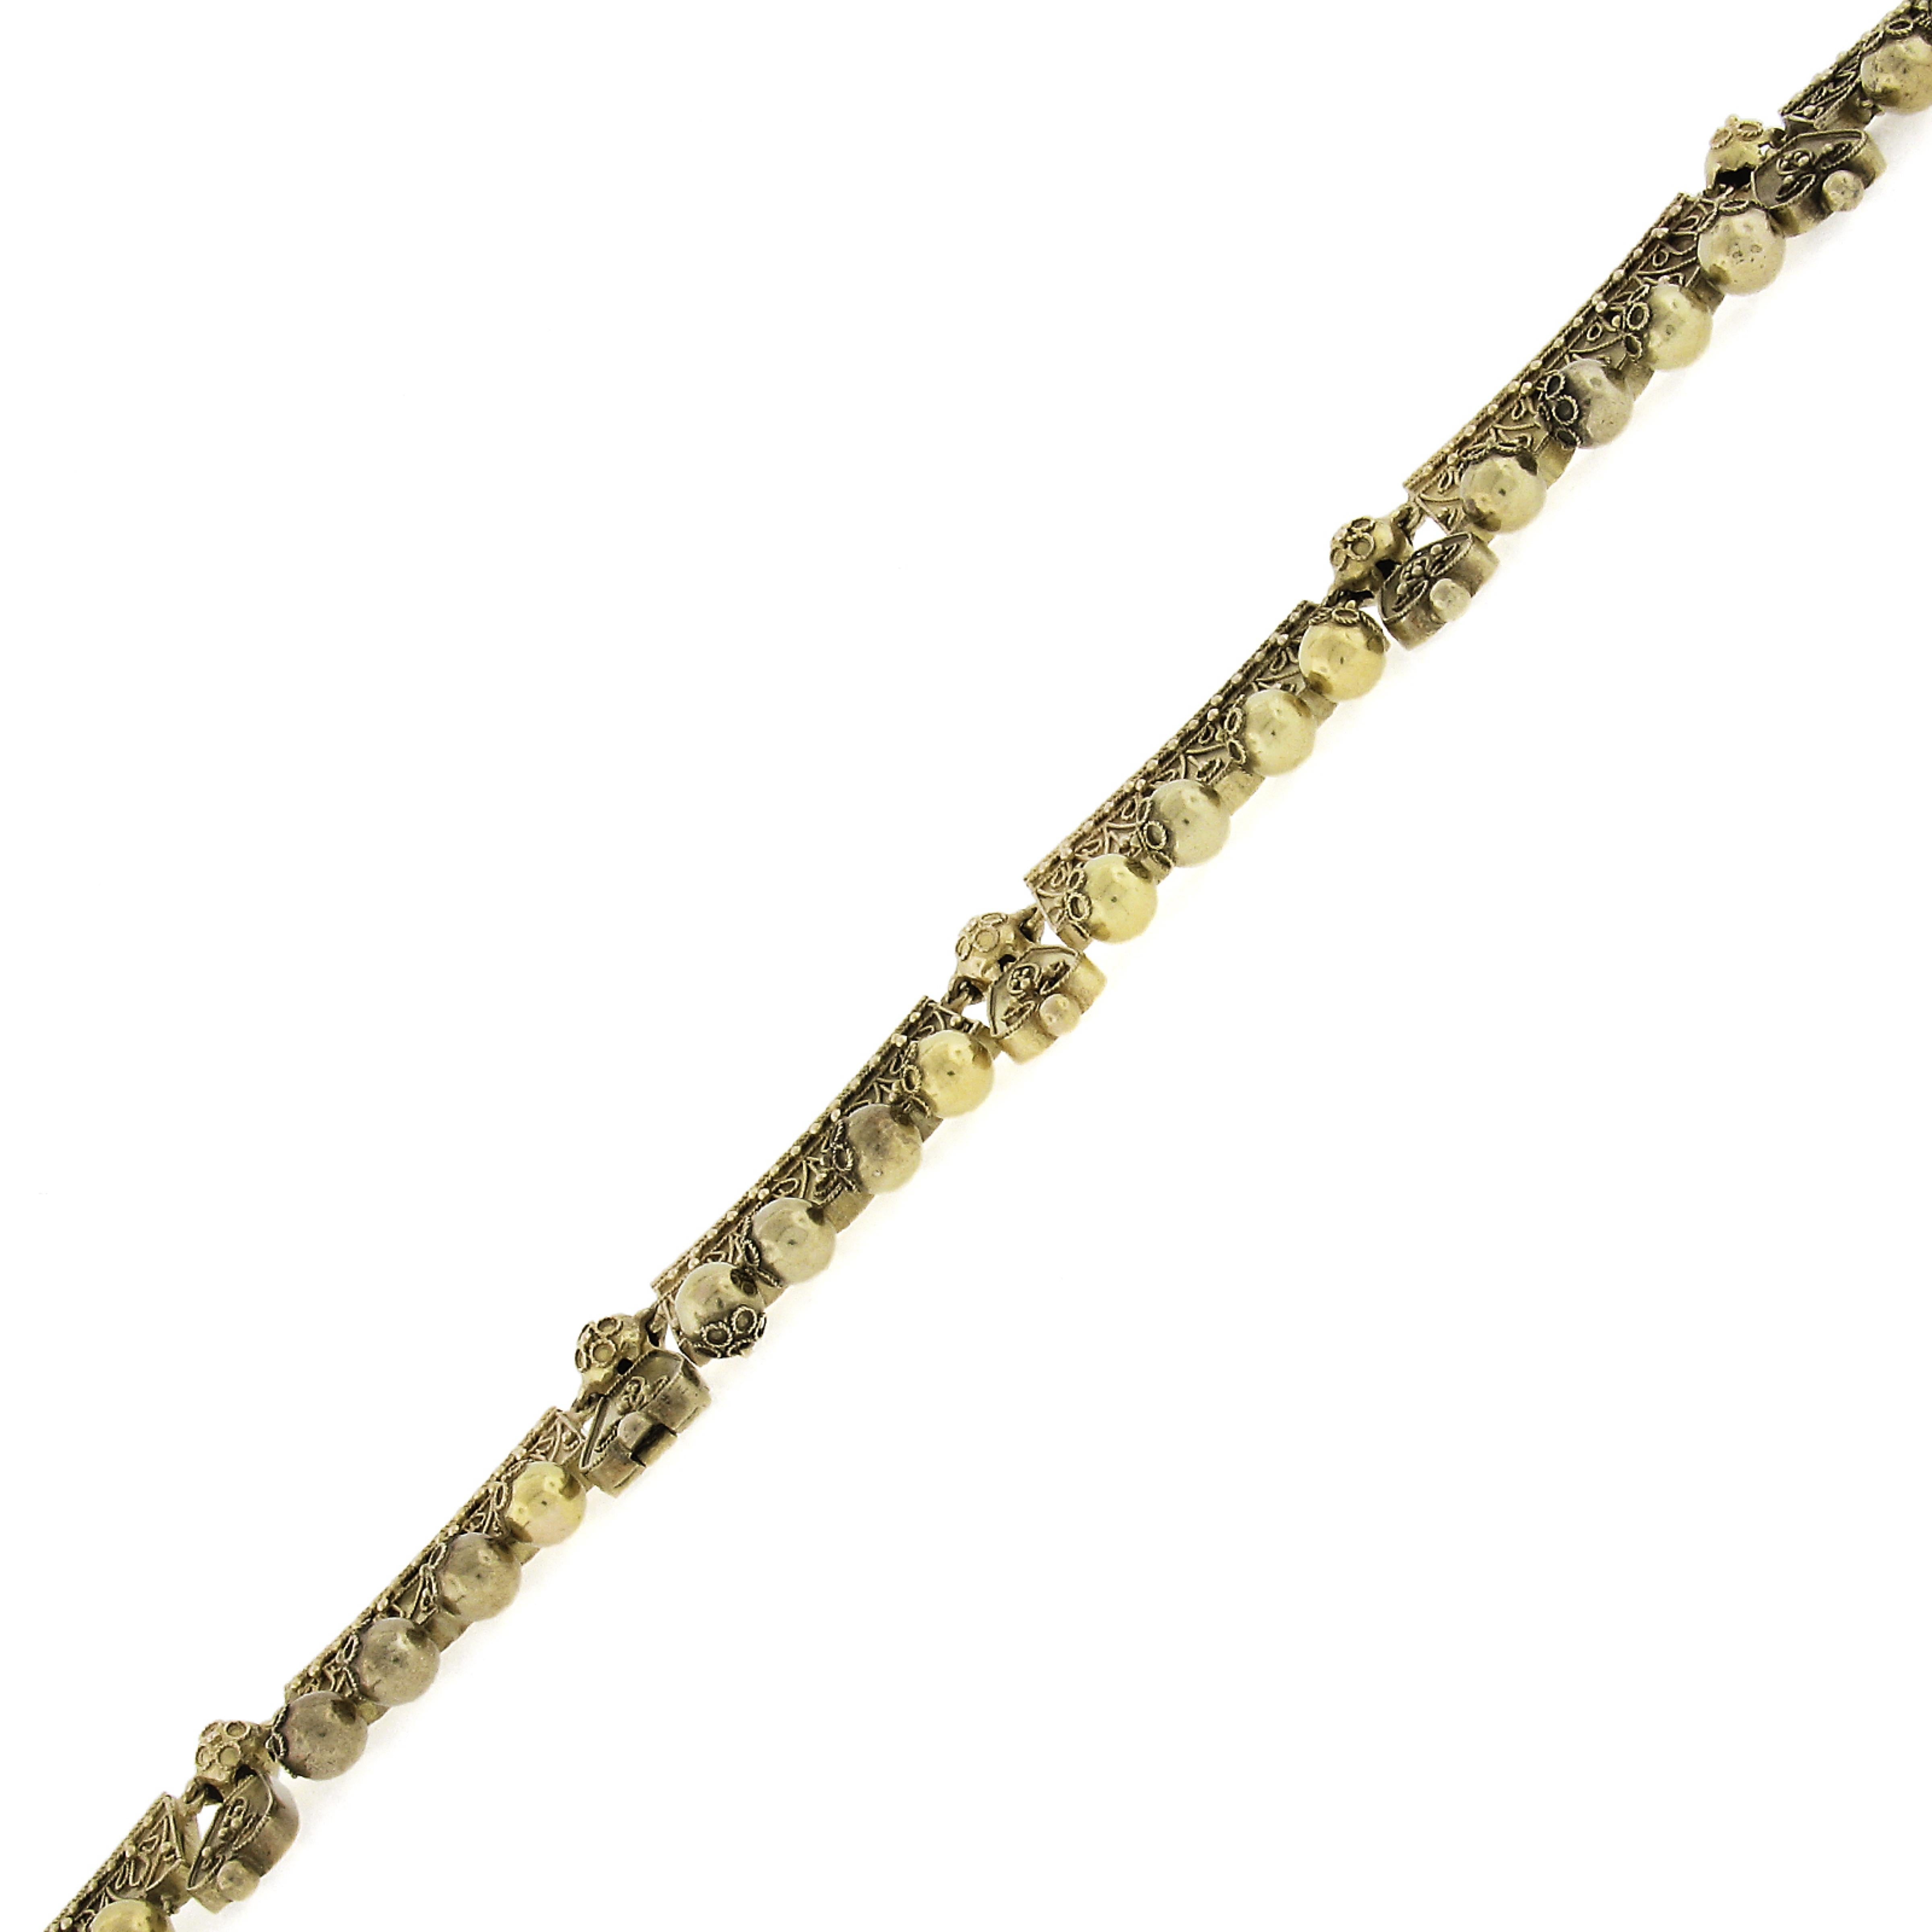 Antique Etruscan Revival Cannetille 18k Yellow Gold Chain Necklace Swivel Bail For Sale 3